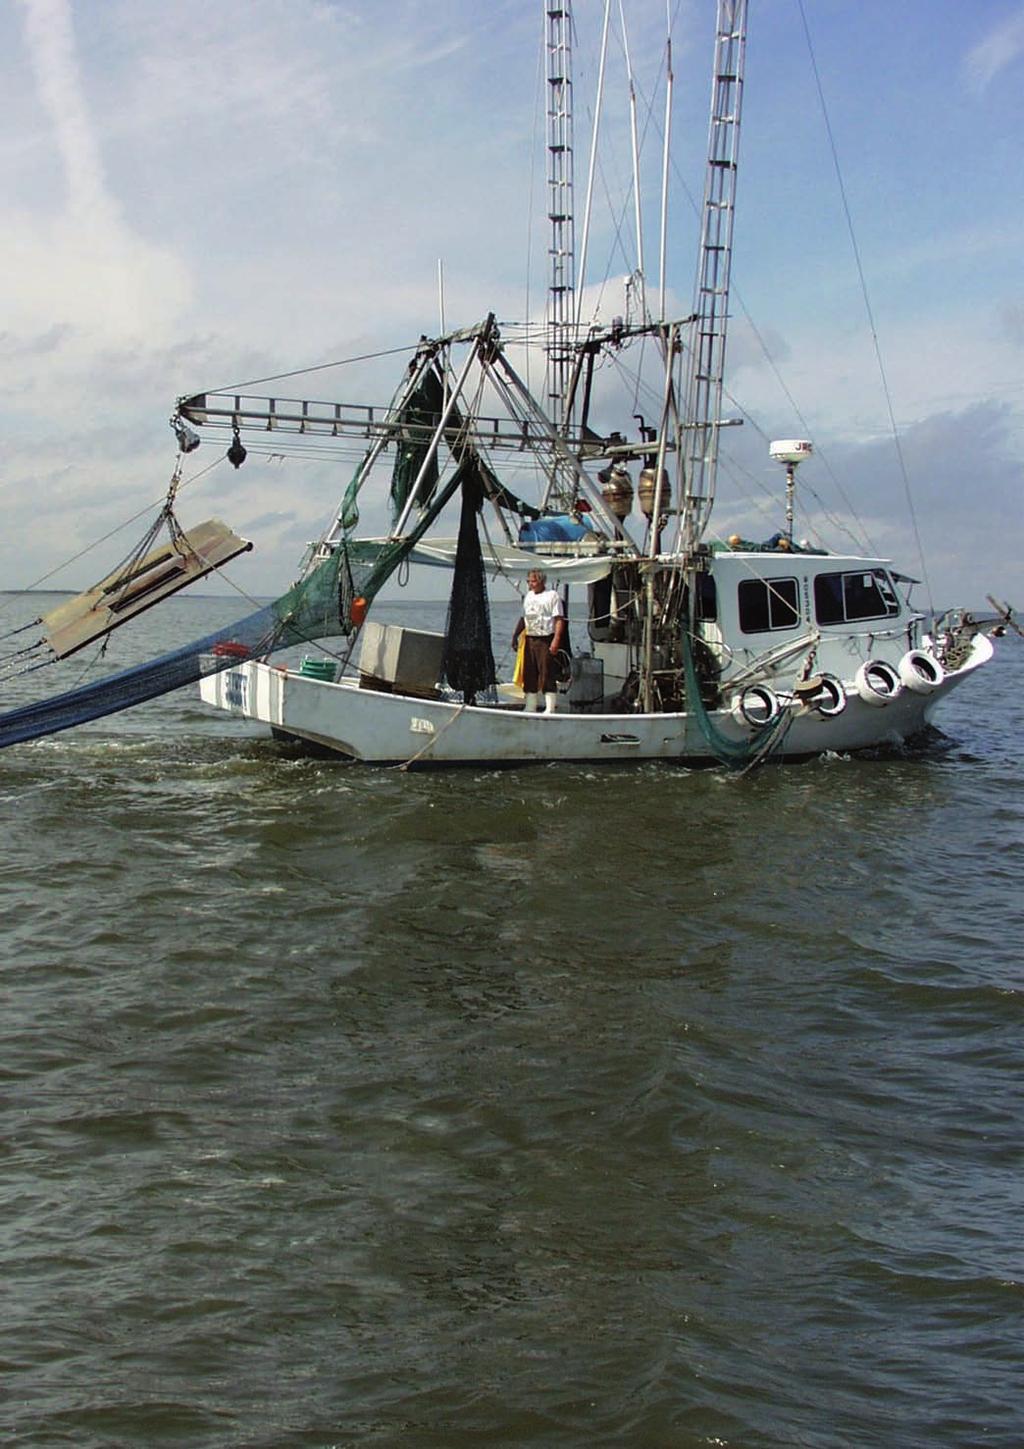 Shrimp trawl fisheries Marine fish stocks are under increasing threat from a range of spatially based problems that might be natural or involve socio-economic factors.